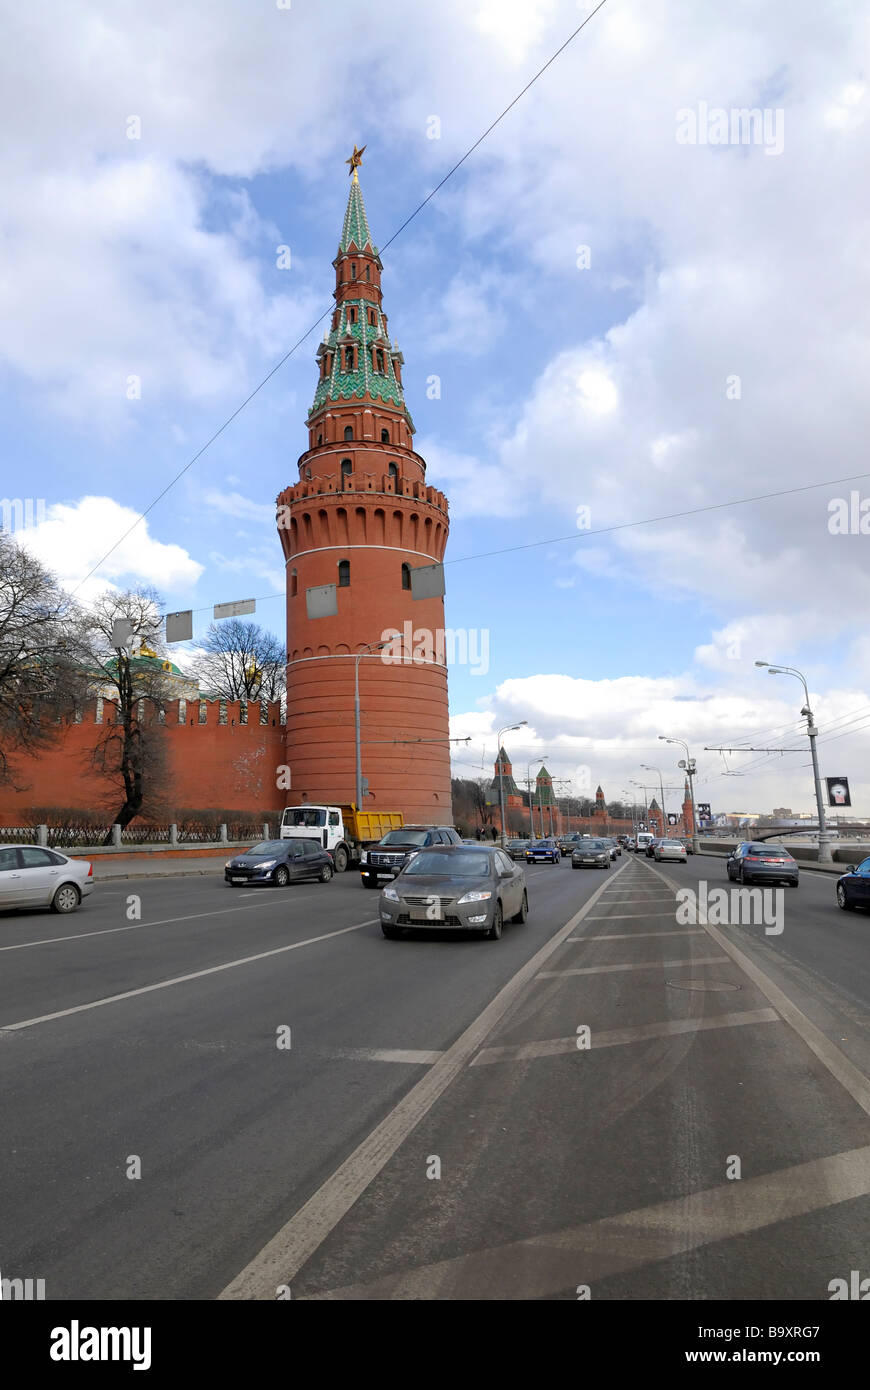 Kremlin tower Moscow Russia Stock Photo